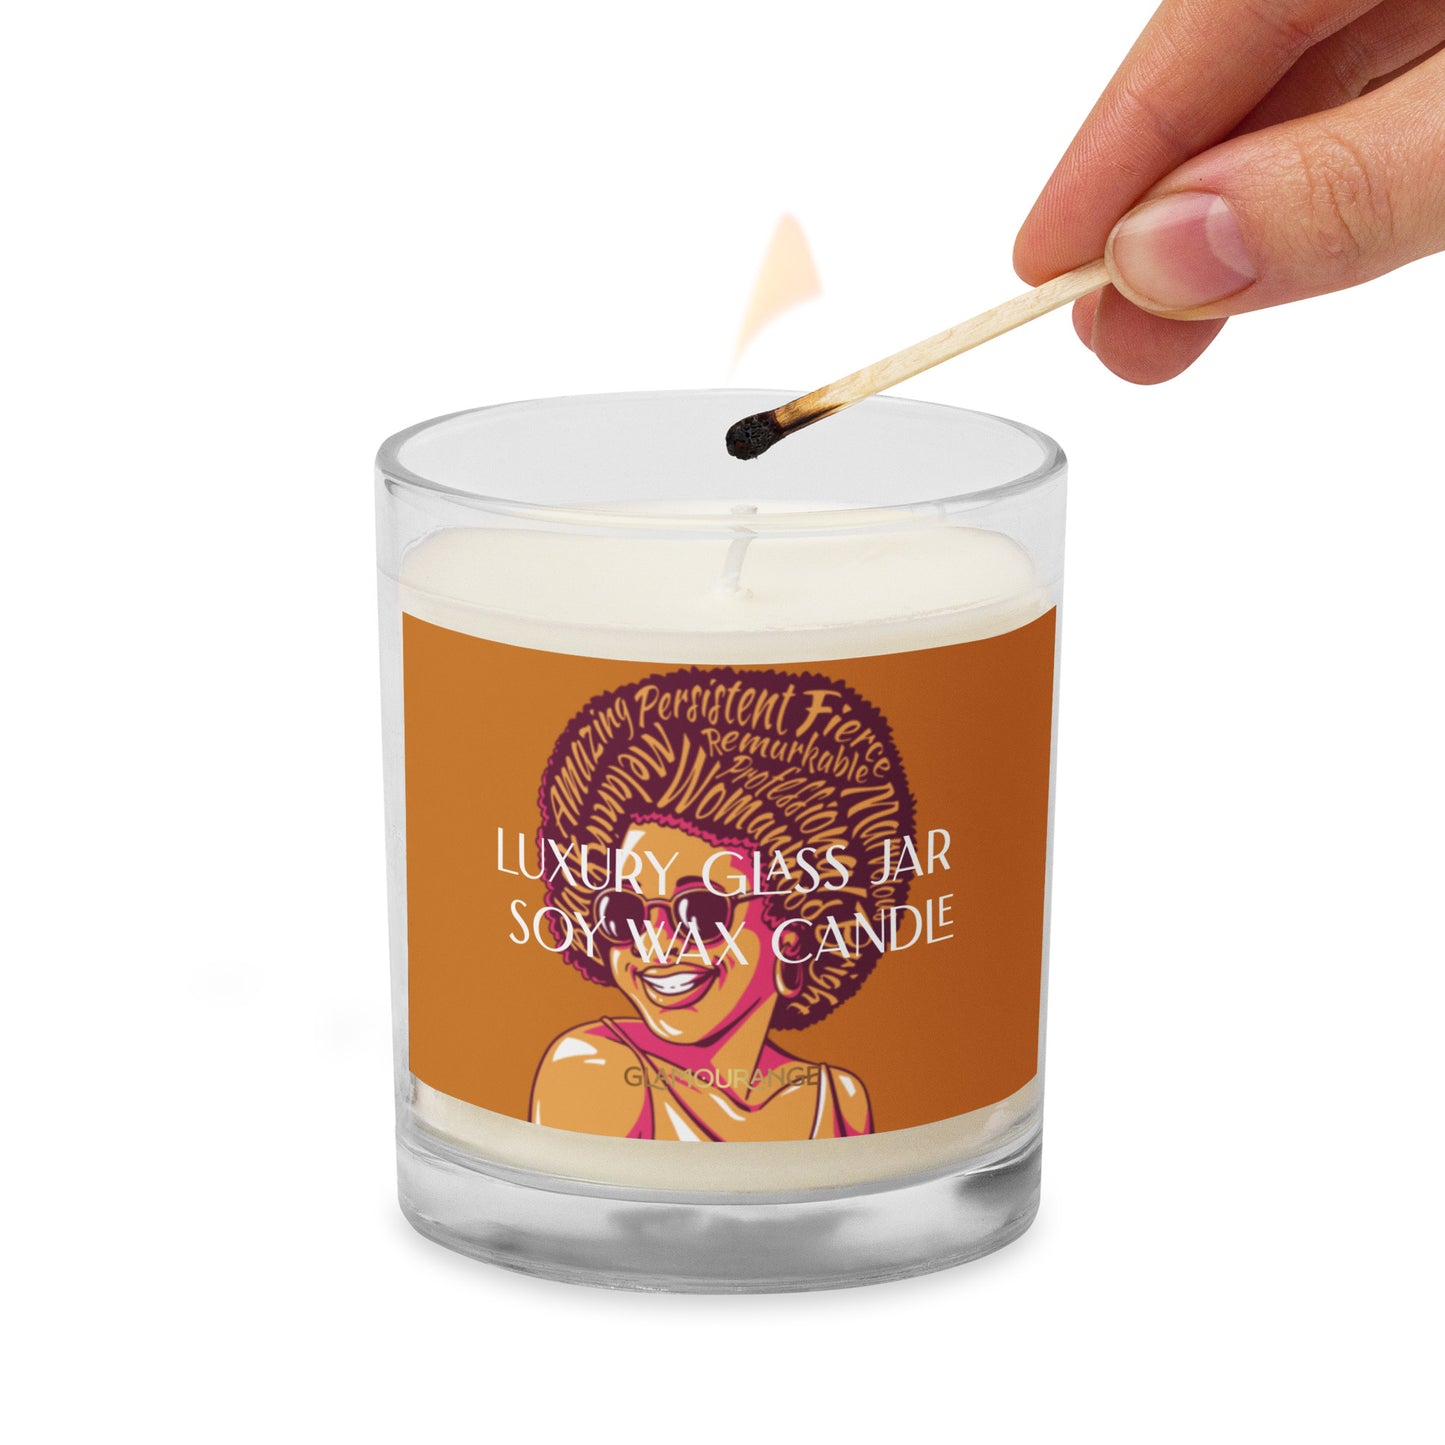 Glass Jar Soy Wax Candle (African Beauty - People Label 0037)